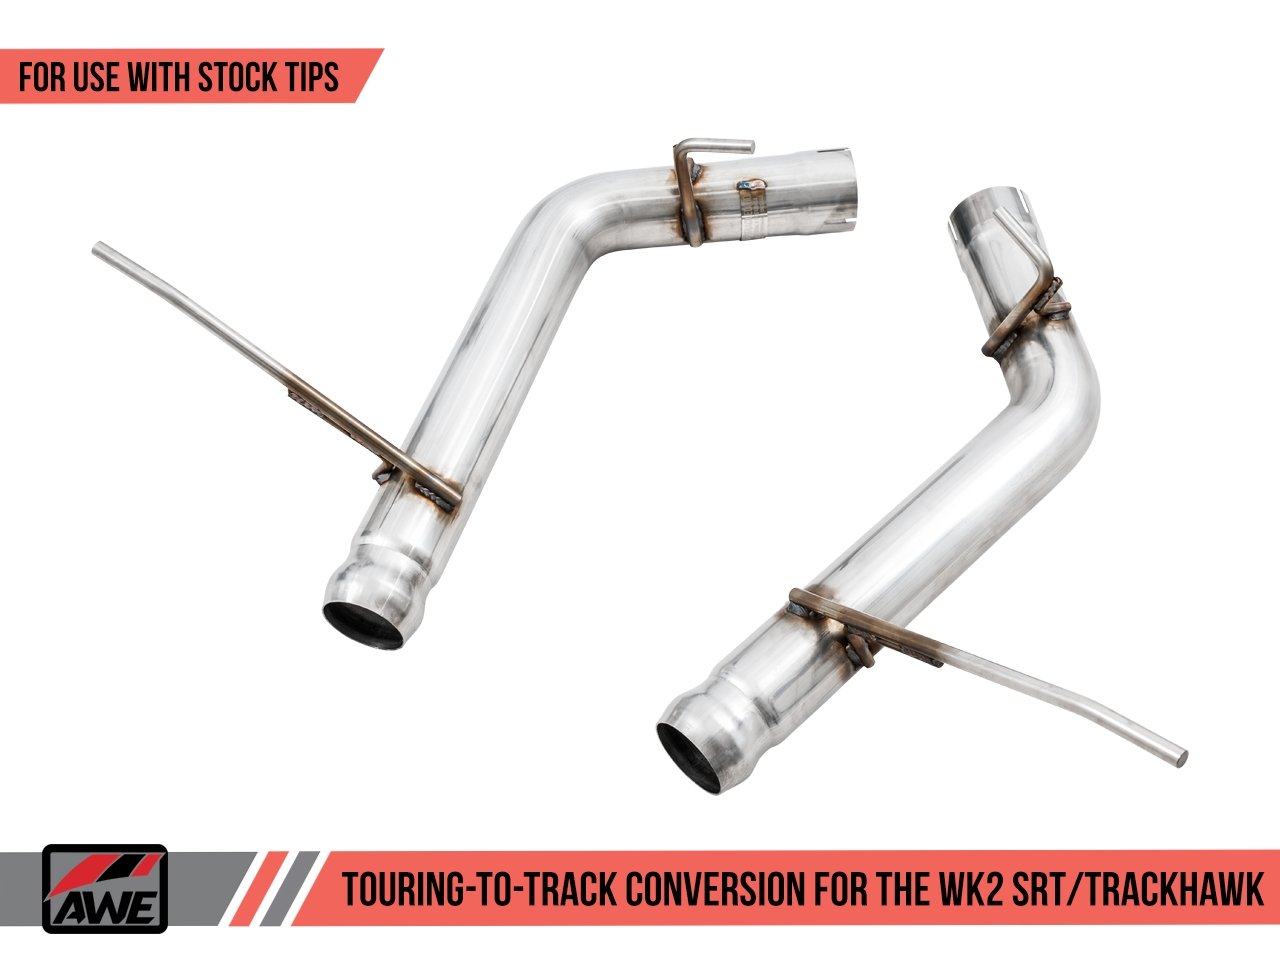 Touring-to-Track Conversion Exhaust for Jeep Grand Cherokee SRT and Trackhawk - for use with stock tips